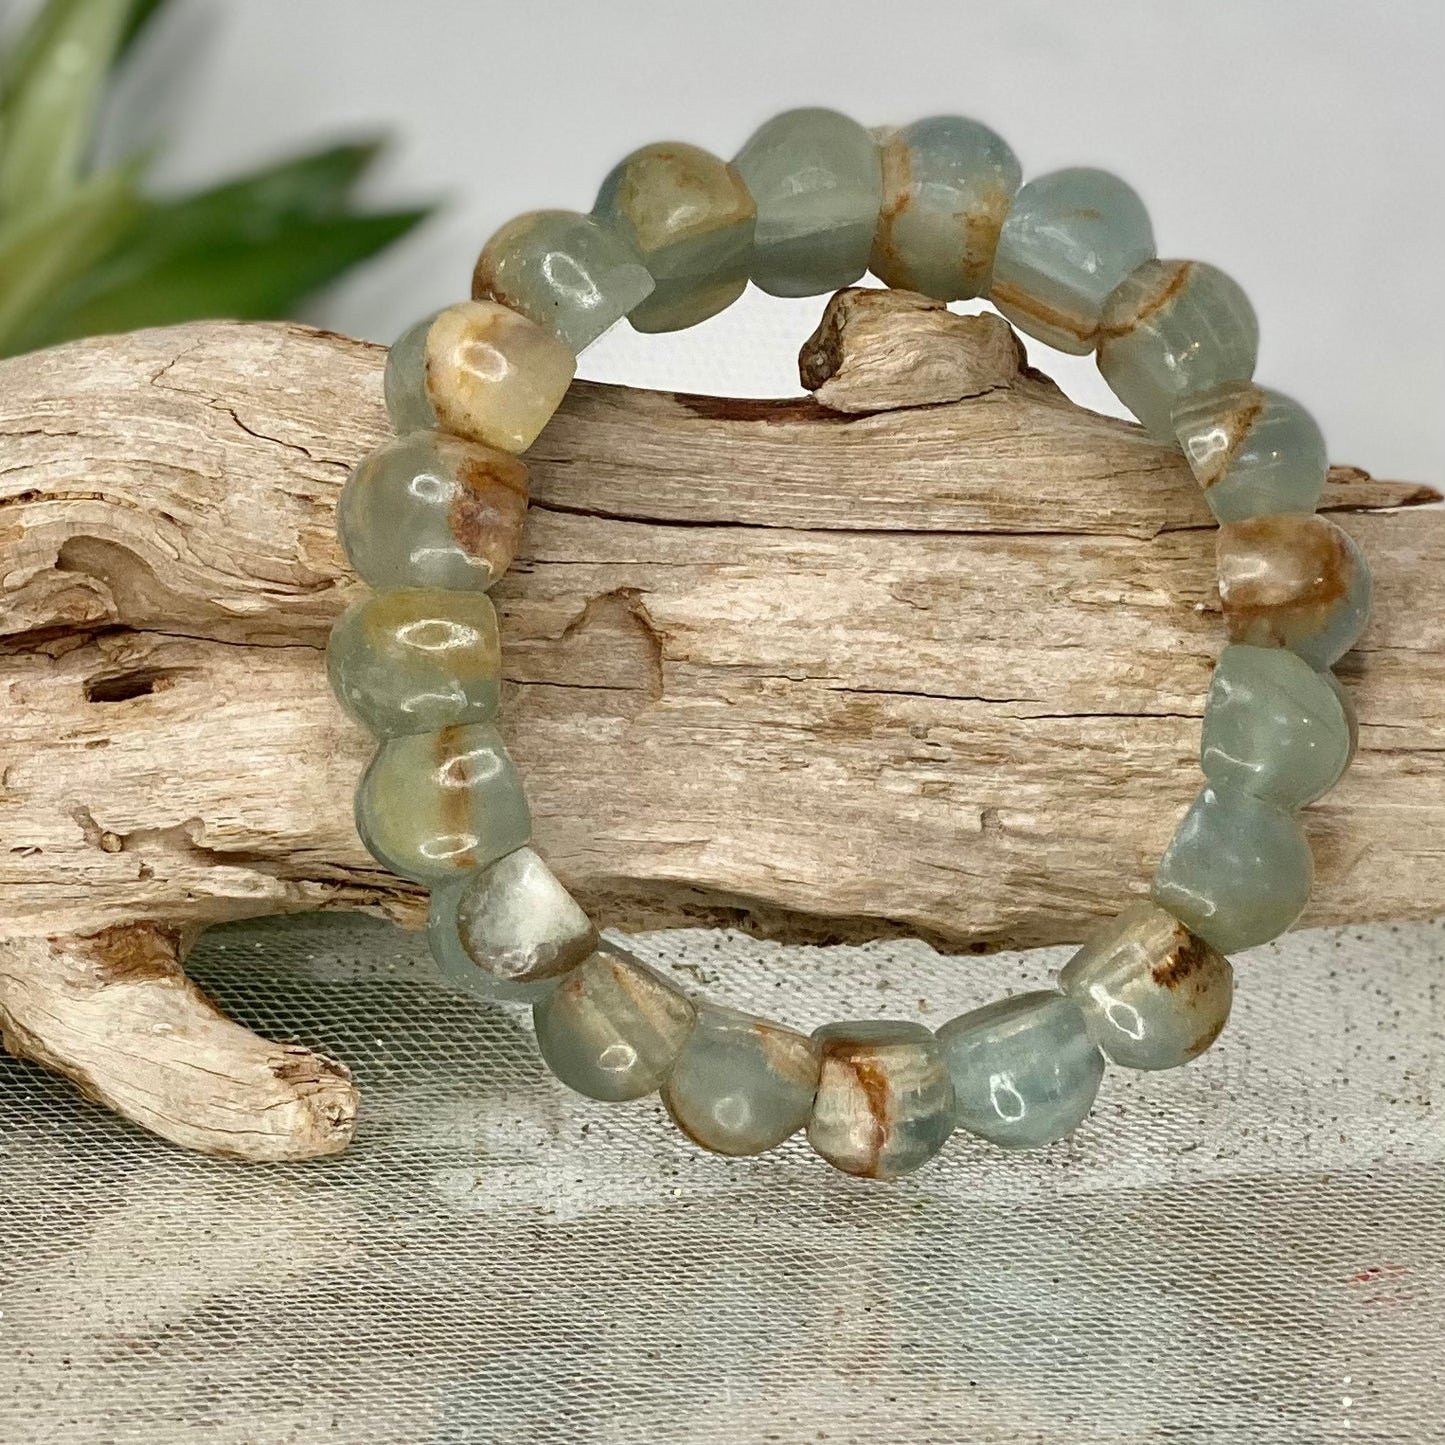 Blue Calcite Bracelet - Soothing Tranquility and Communication Crystals